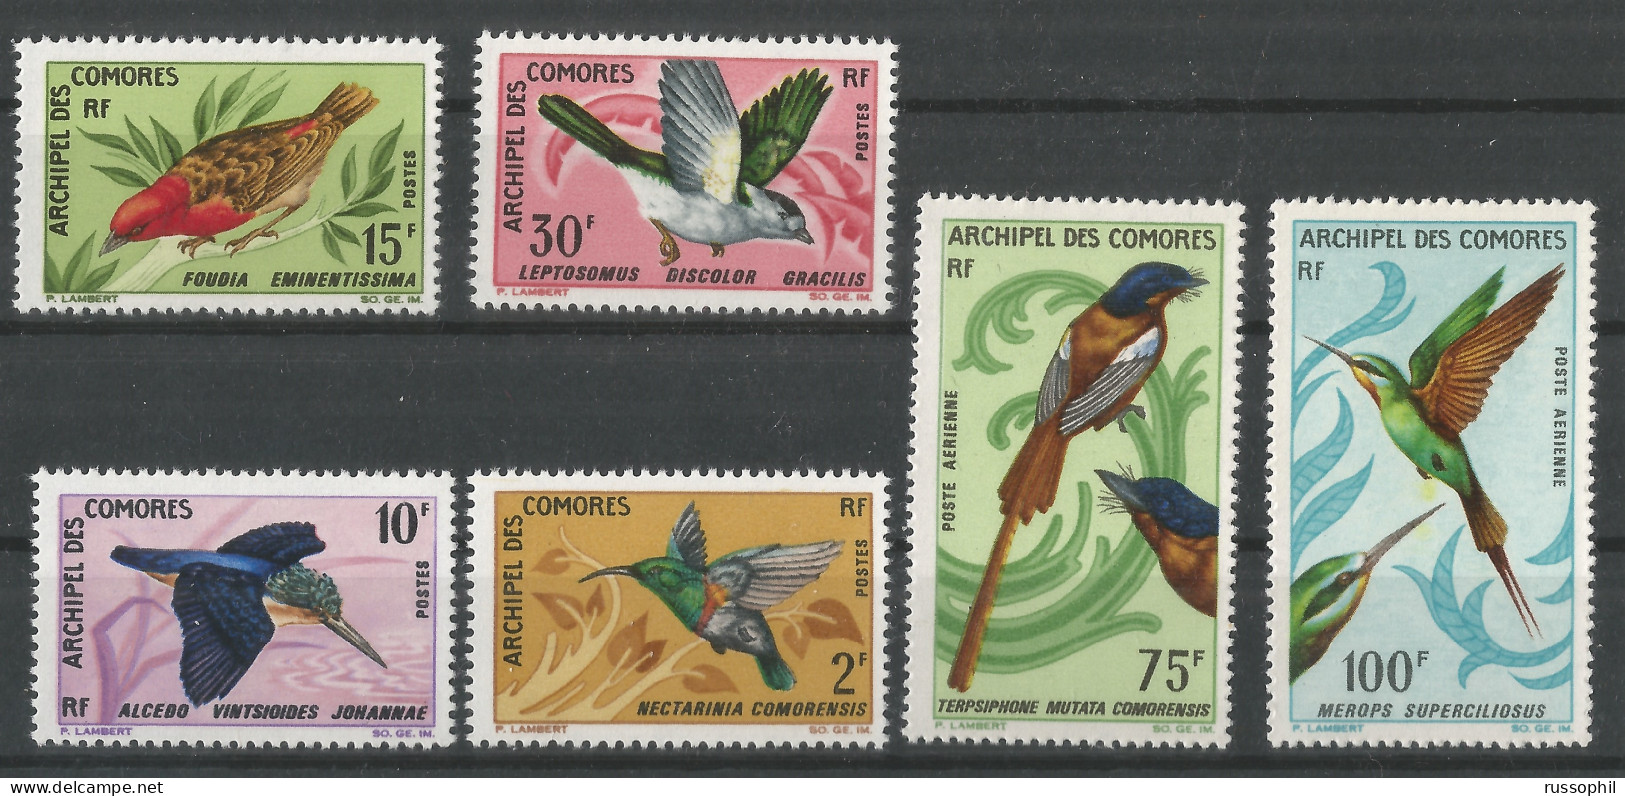 COMORES - OISEAUX - BIRDS -  Yv. #41 TO Yv. #44 AND Yv. #PA20 AND Yv. #PA21 -  (**/MNH) - 1967 - Nuevos